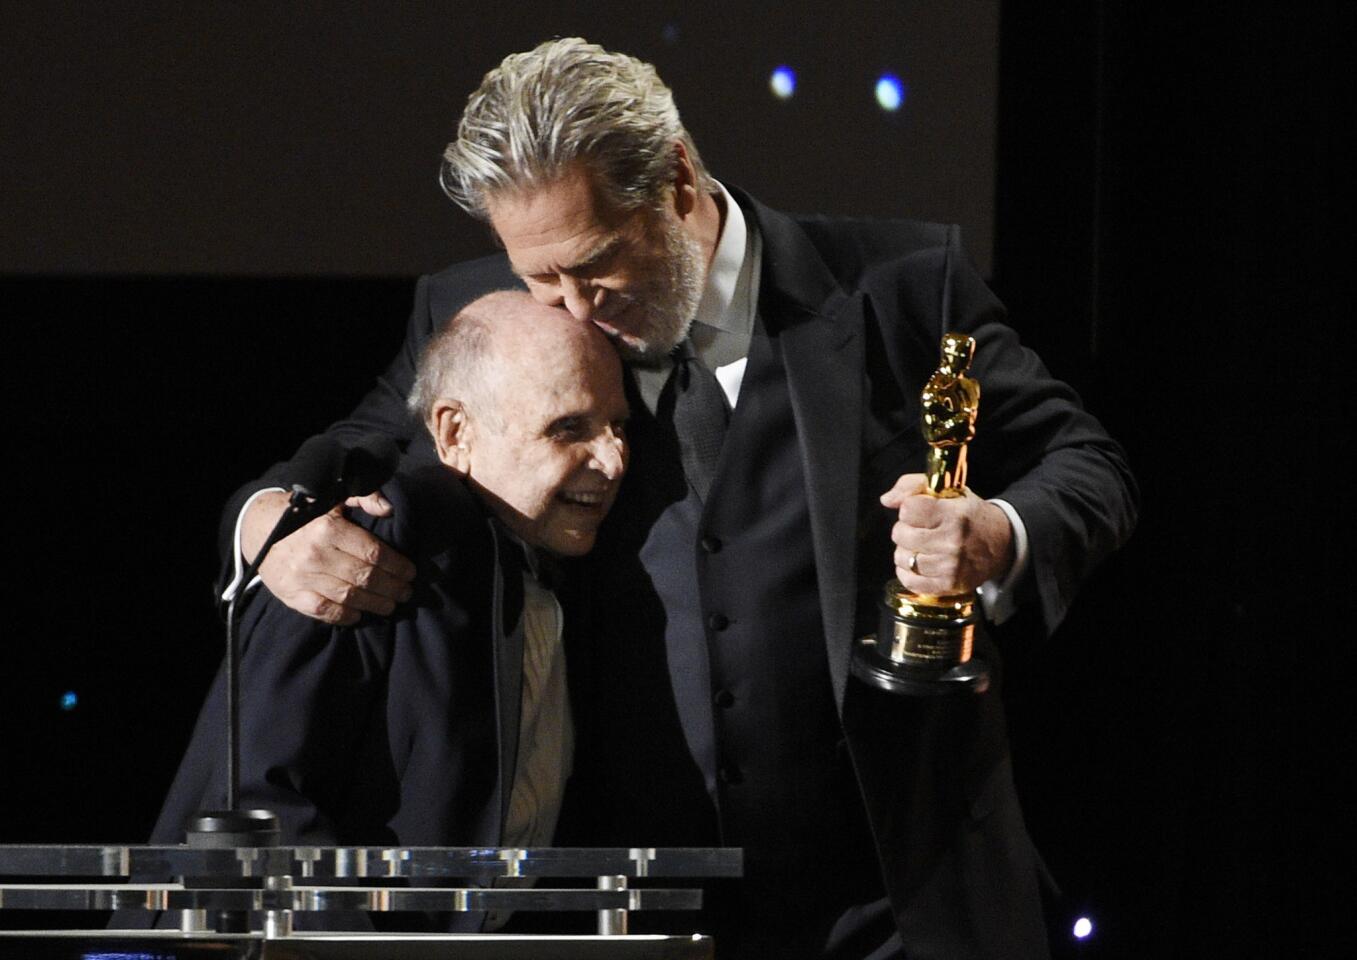 Honoree Lynn Stalmaster, left, is embraced by presenter Jeff Bridges at the film academy's 2016 Governors Awards at the Dolby Ballroom on Saturday.